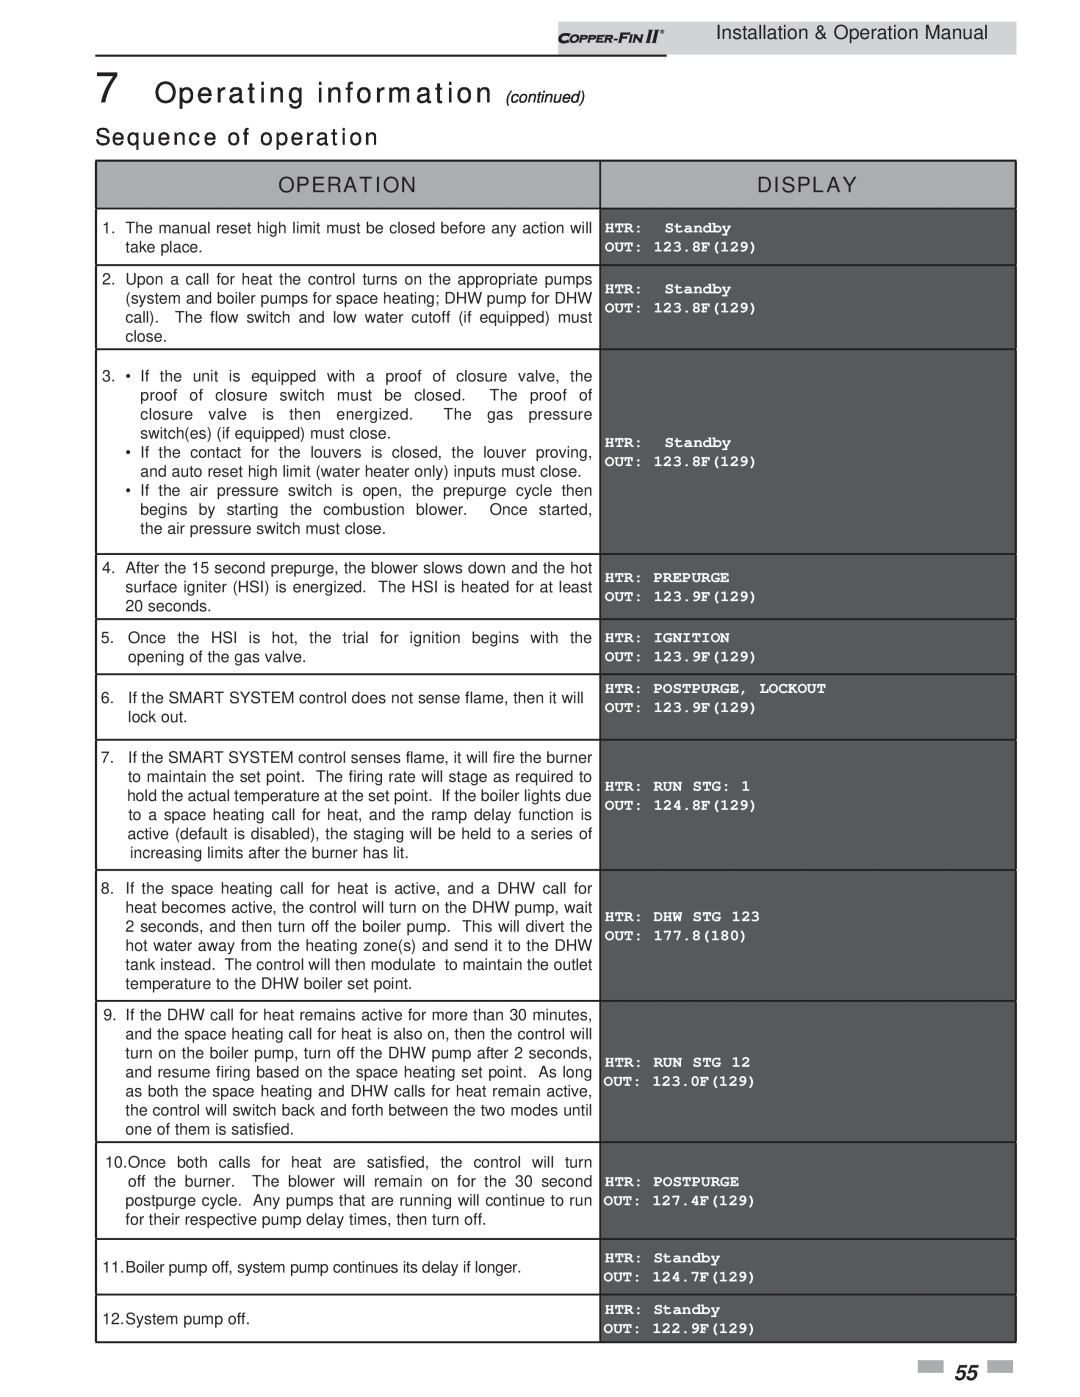 Lochinvar 402 - 2072 operation manual Sequence of operation, Operation, Display, Operating information continued 